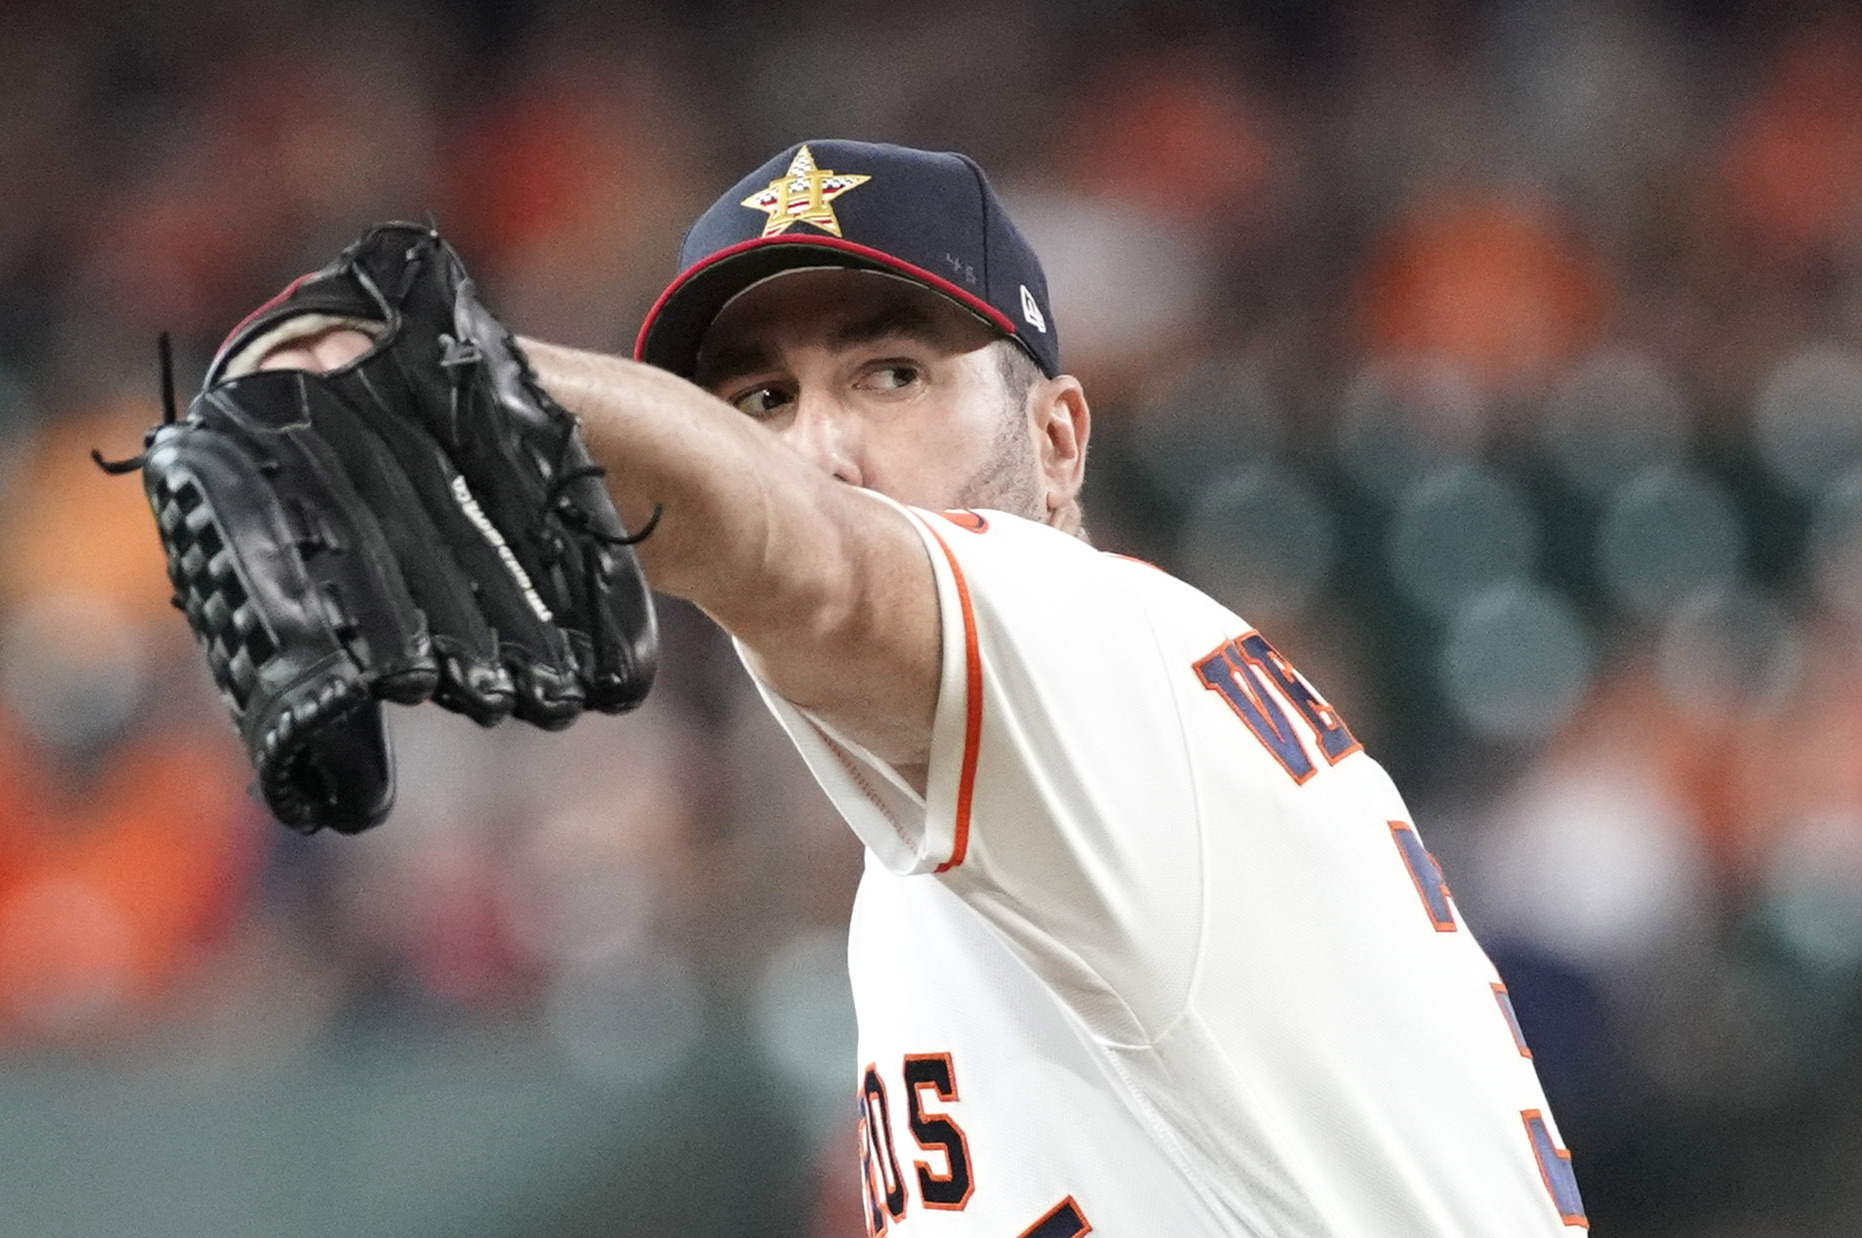 Verlander's Grips, as shown during the game last night : r/baseball